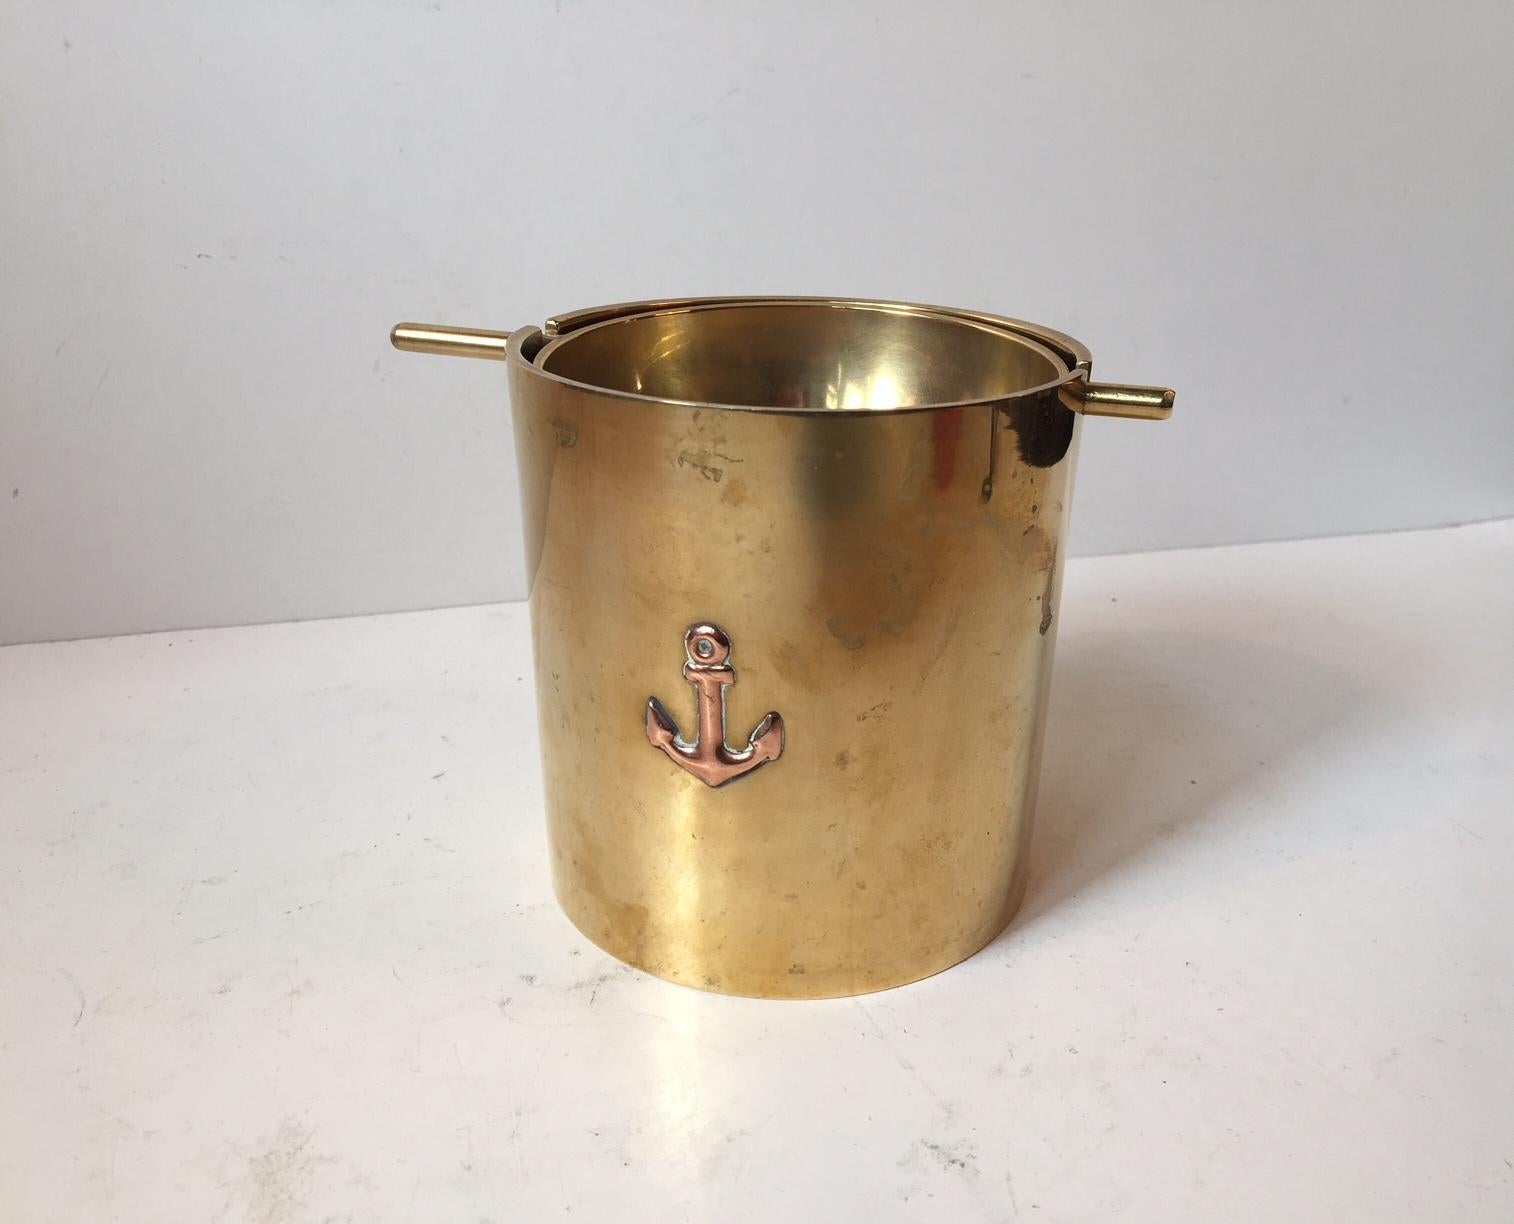 This brass version of the Cylinda-line ashtray was designed by Arne Jacobsen and manufactured by Stelton in a limited run in 1967. This, the large version or cigar ashtray, is by far the rarest of the two sizes it came in. Please notice that it has